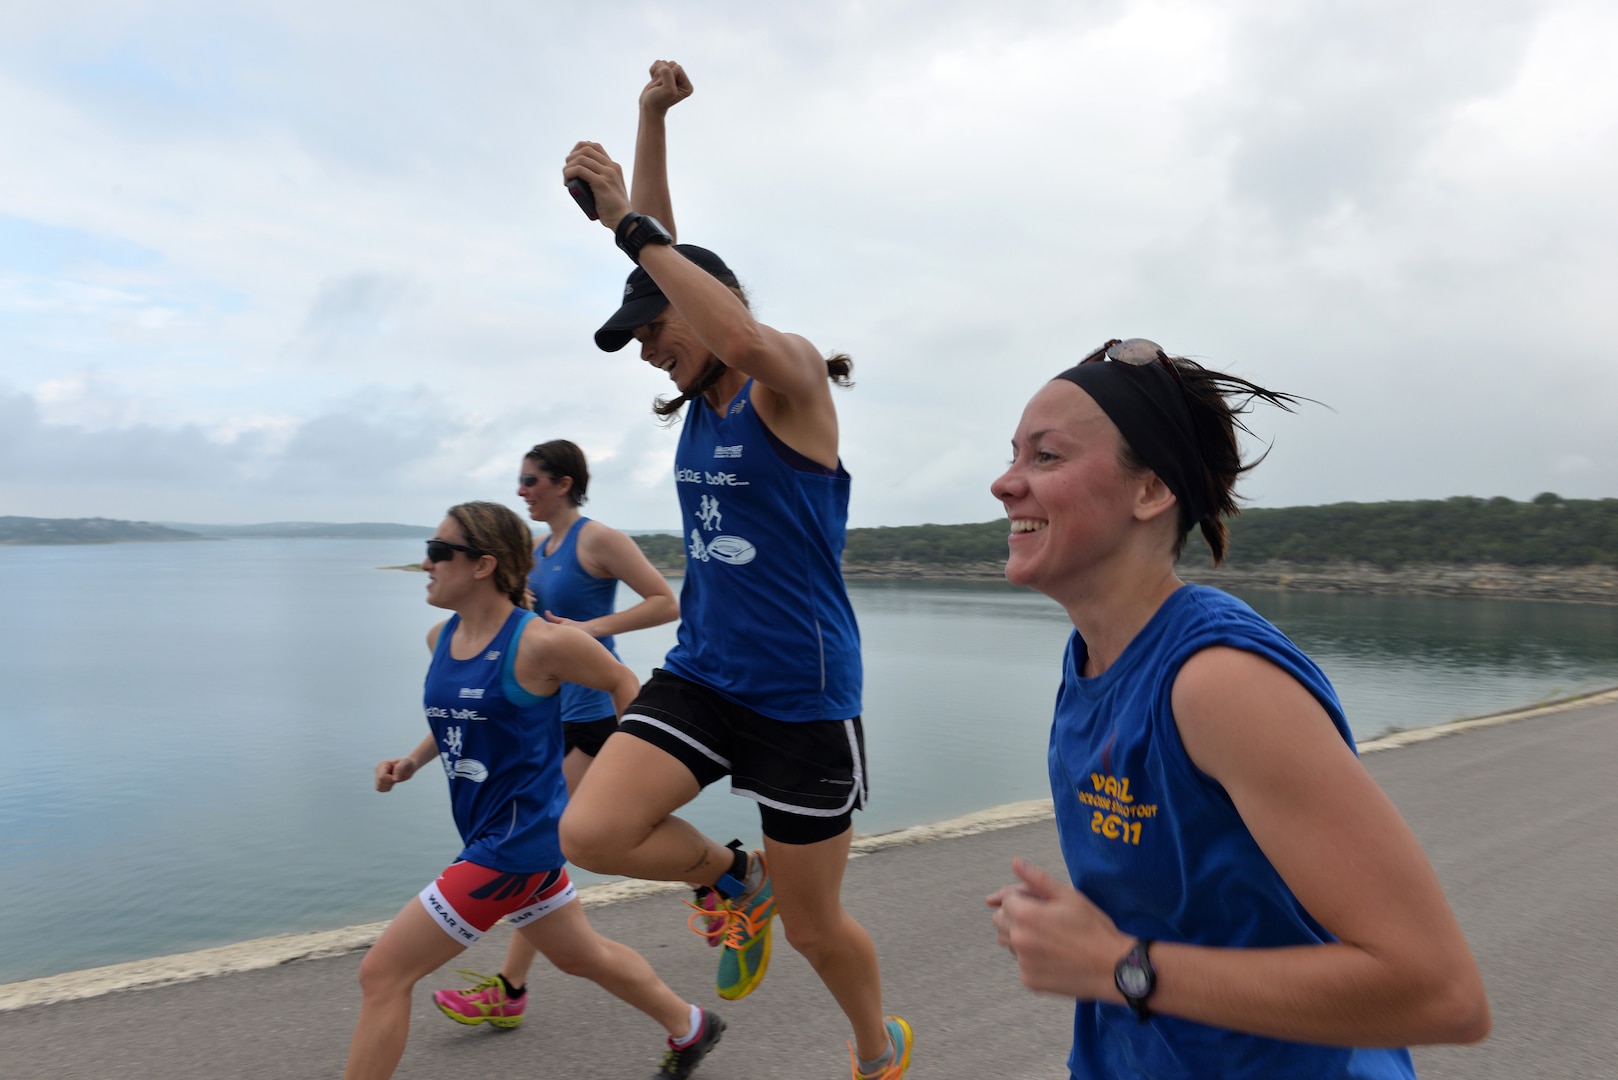 Master Sgt. Amy Morgan, from right to left, Capt. Brandy Caffee, Capt. Vincenza Grossman and Robyn Kadel runs on top of the Canyon Lake dam Sept. 20 during the Rambler 120 Race. The Rambler 120 Race, which includes running, biking, rafting and a mystery event, was held at Joint Base San Antonio Recreation Park at Canyon Lake Sept. 20. Twenty-nine teams competed in the 22-mile bike course, 6-mile run, 2-mile rafting event and a Frisbee toss mystery event.  All team members are in team DDR. (U.S. Air Force photo/Desiree N. Palacios)